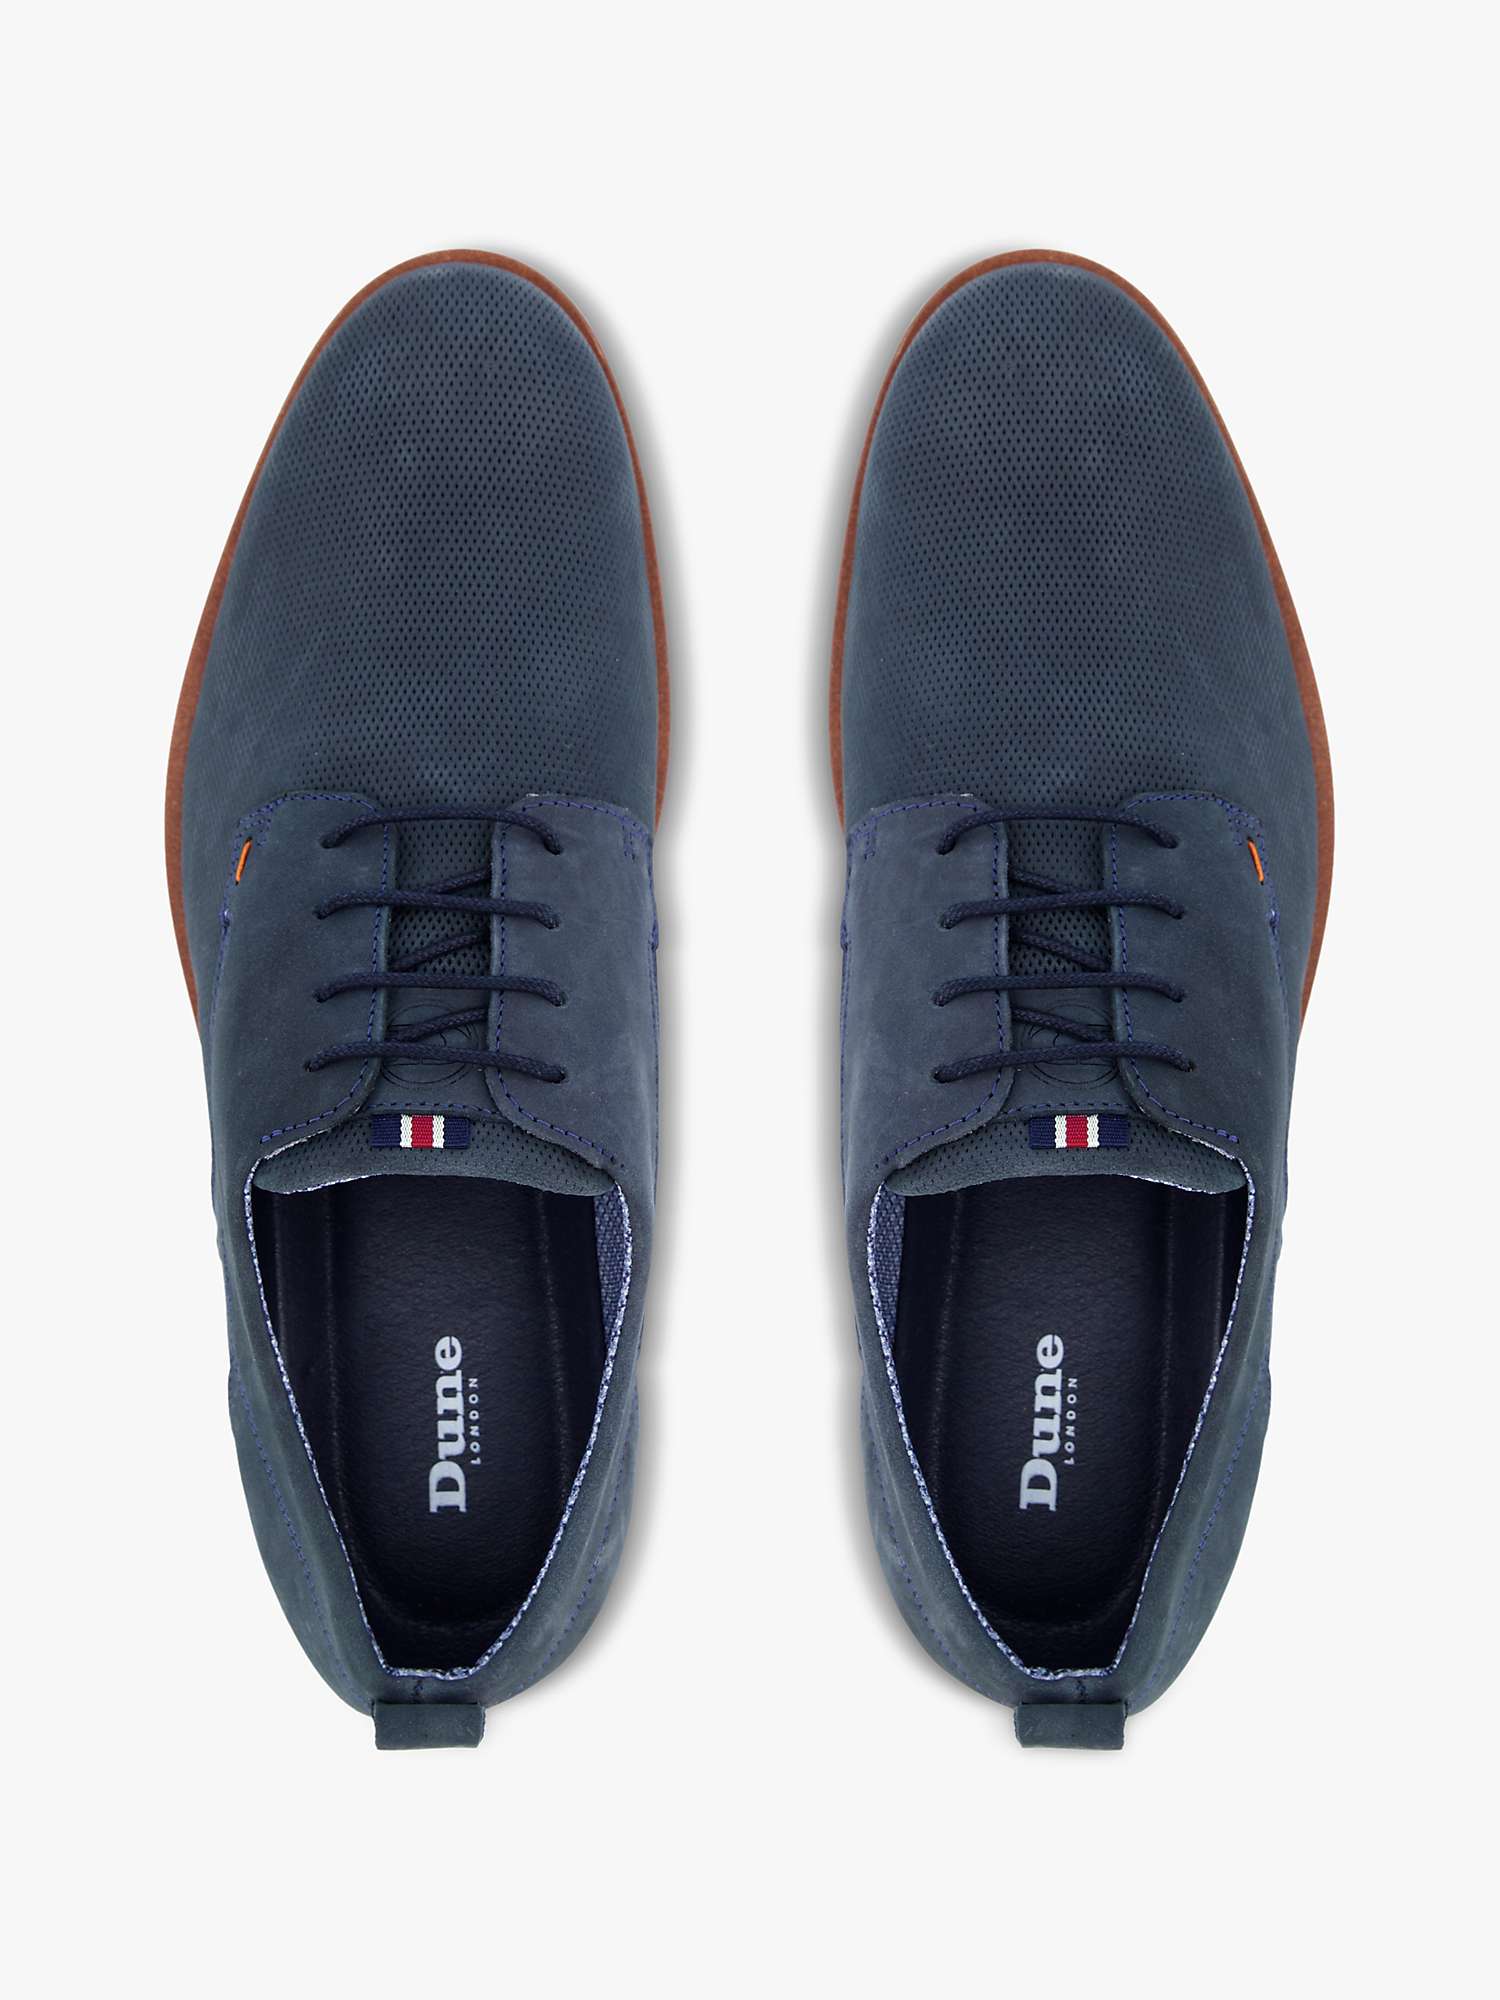 Buy Dune Balad Nubuck Punch Hole Casual Shoes Online at johnlewis.com